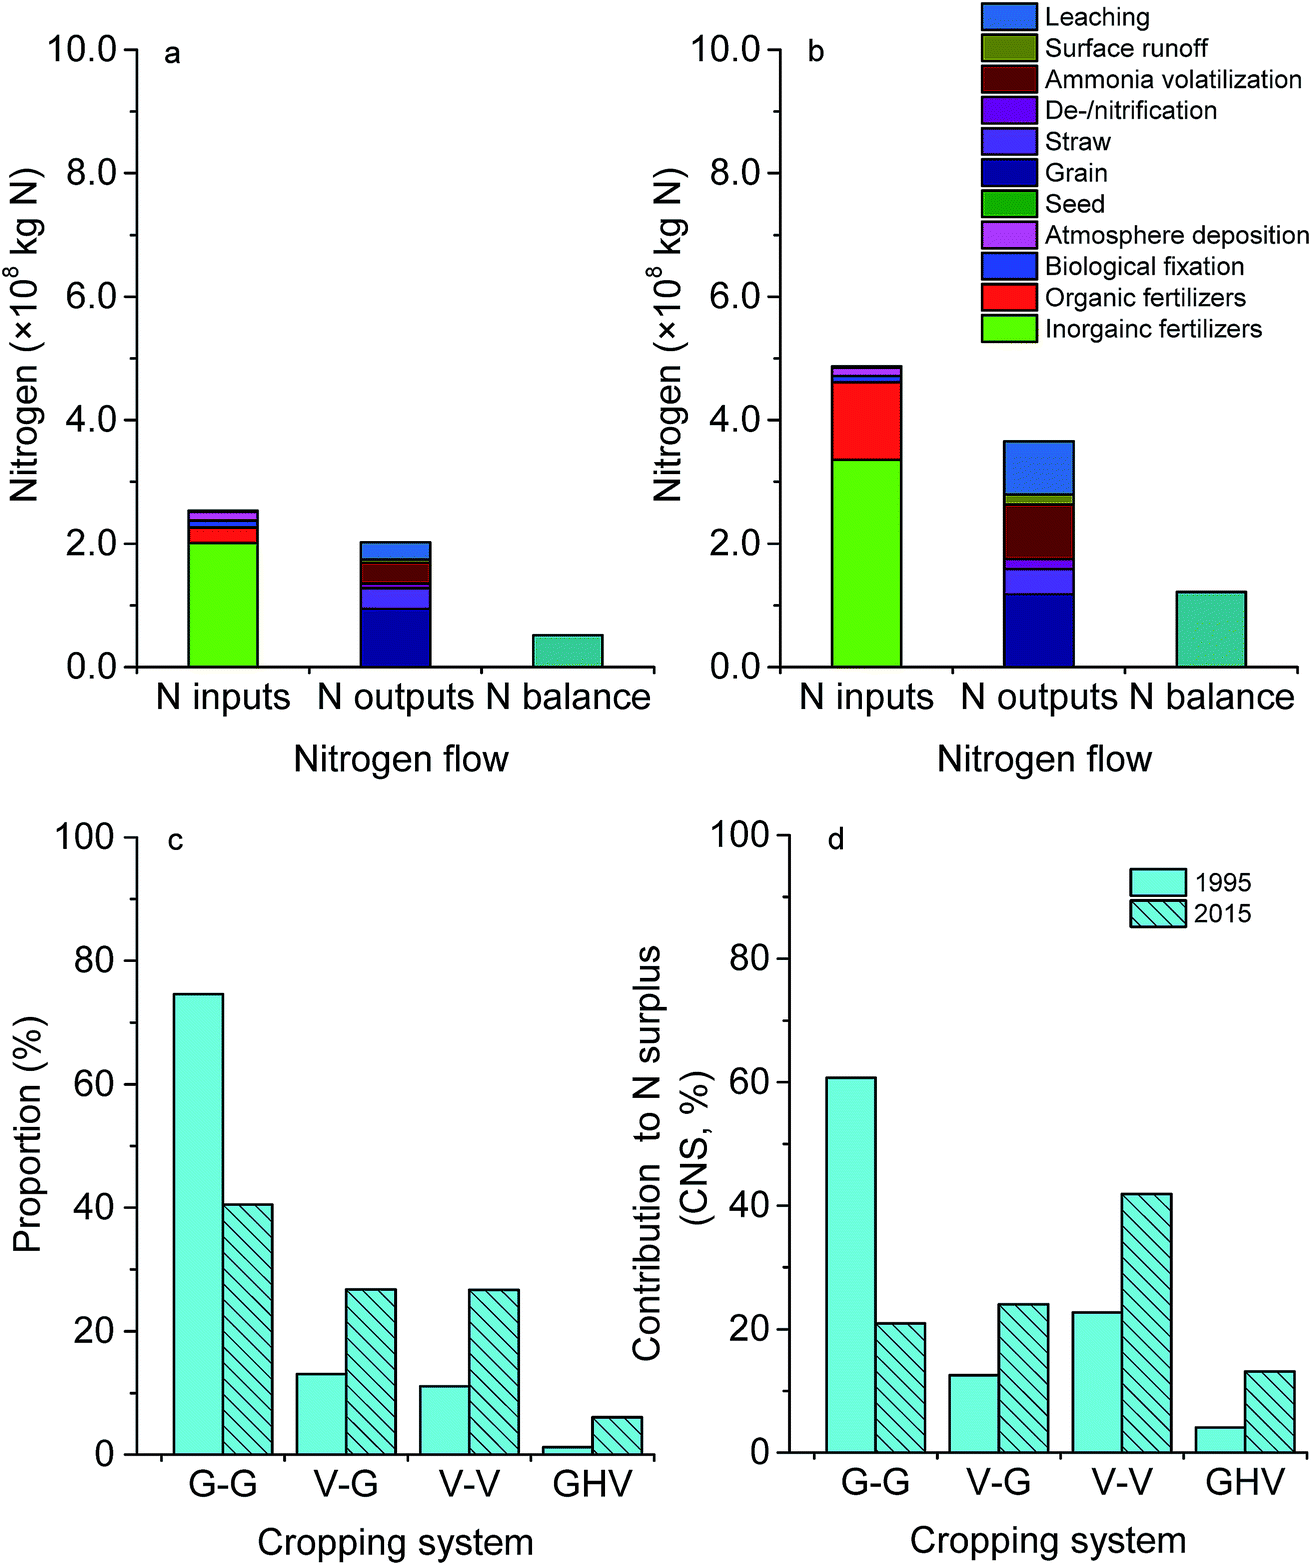 Enhanced Nitrogen Imbalances In Agroecosystems Driven By Changing Cropping Systems In A Coastal Area Of Eastern China From Field To Watershed Scale Environmental Science Processes Impacts Rsc Publishing